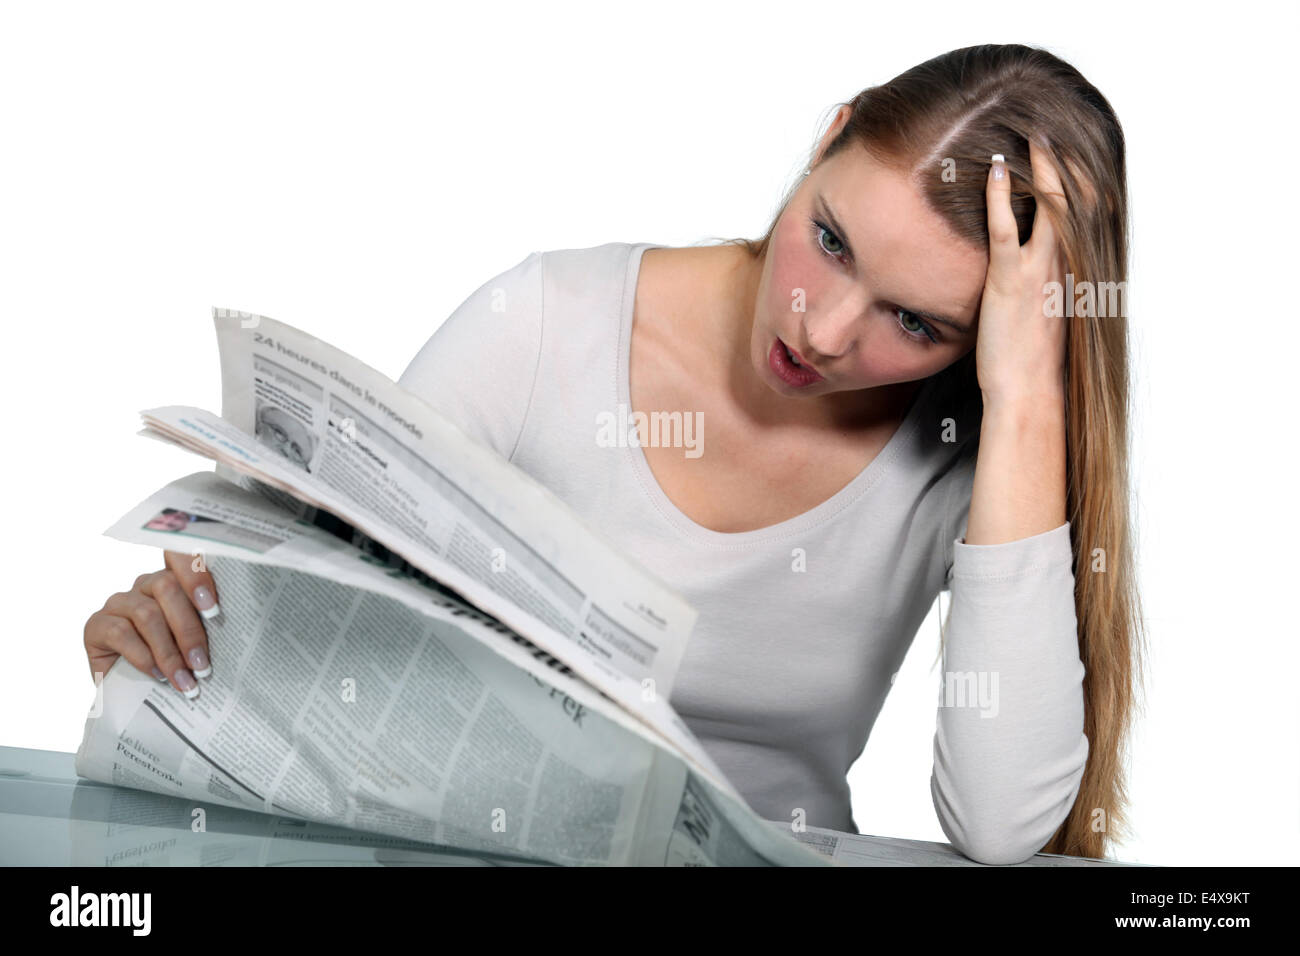 Woman reading a newspaper Stock Photo